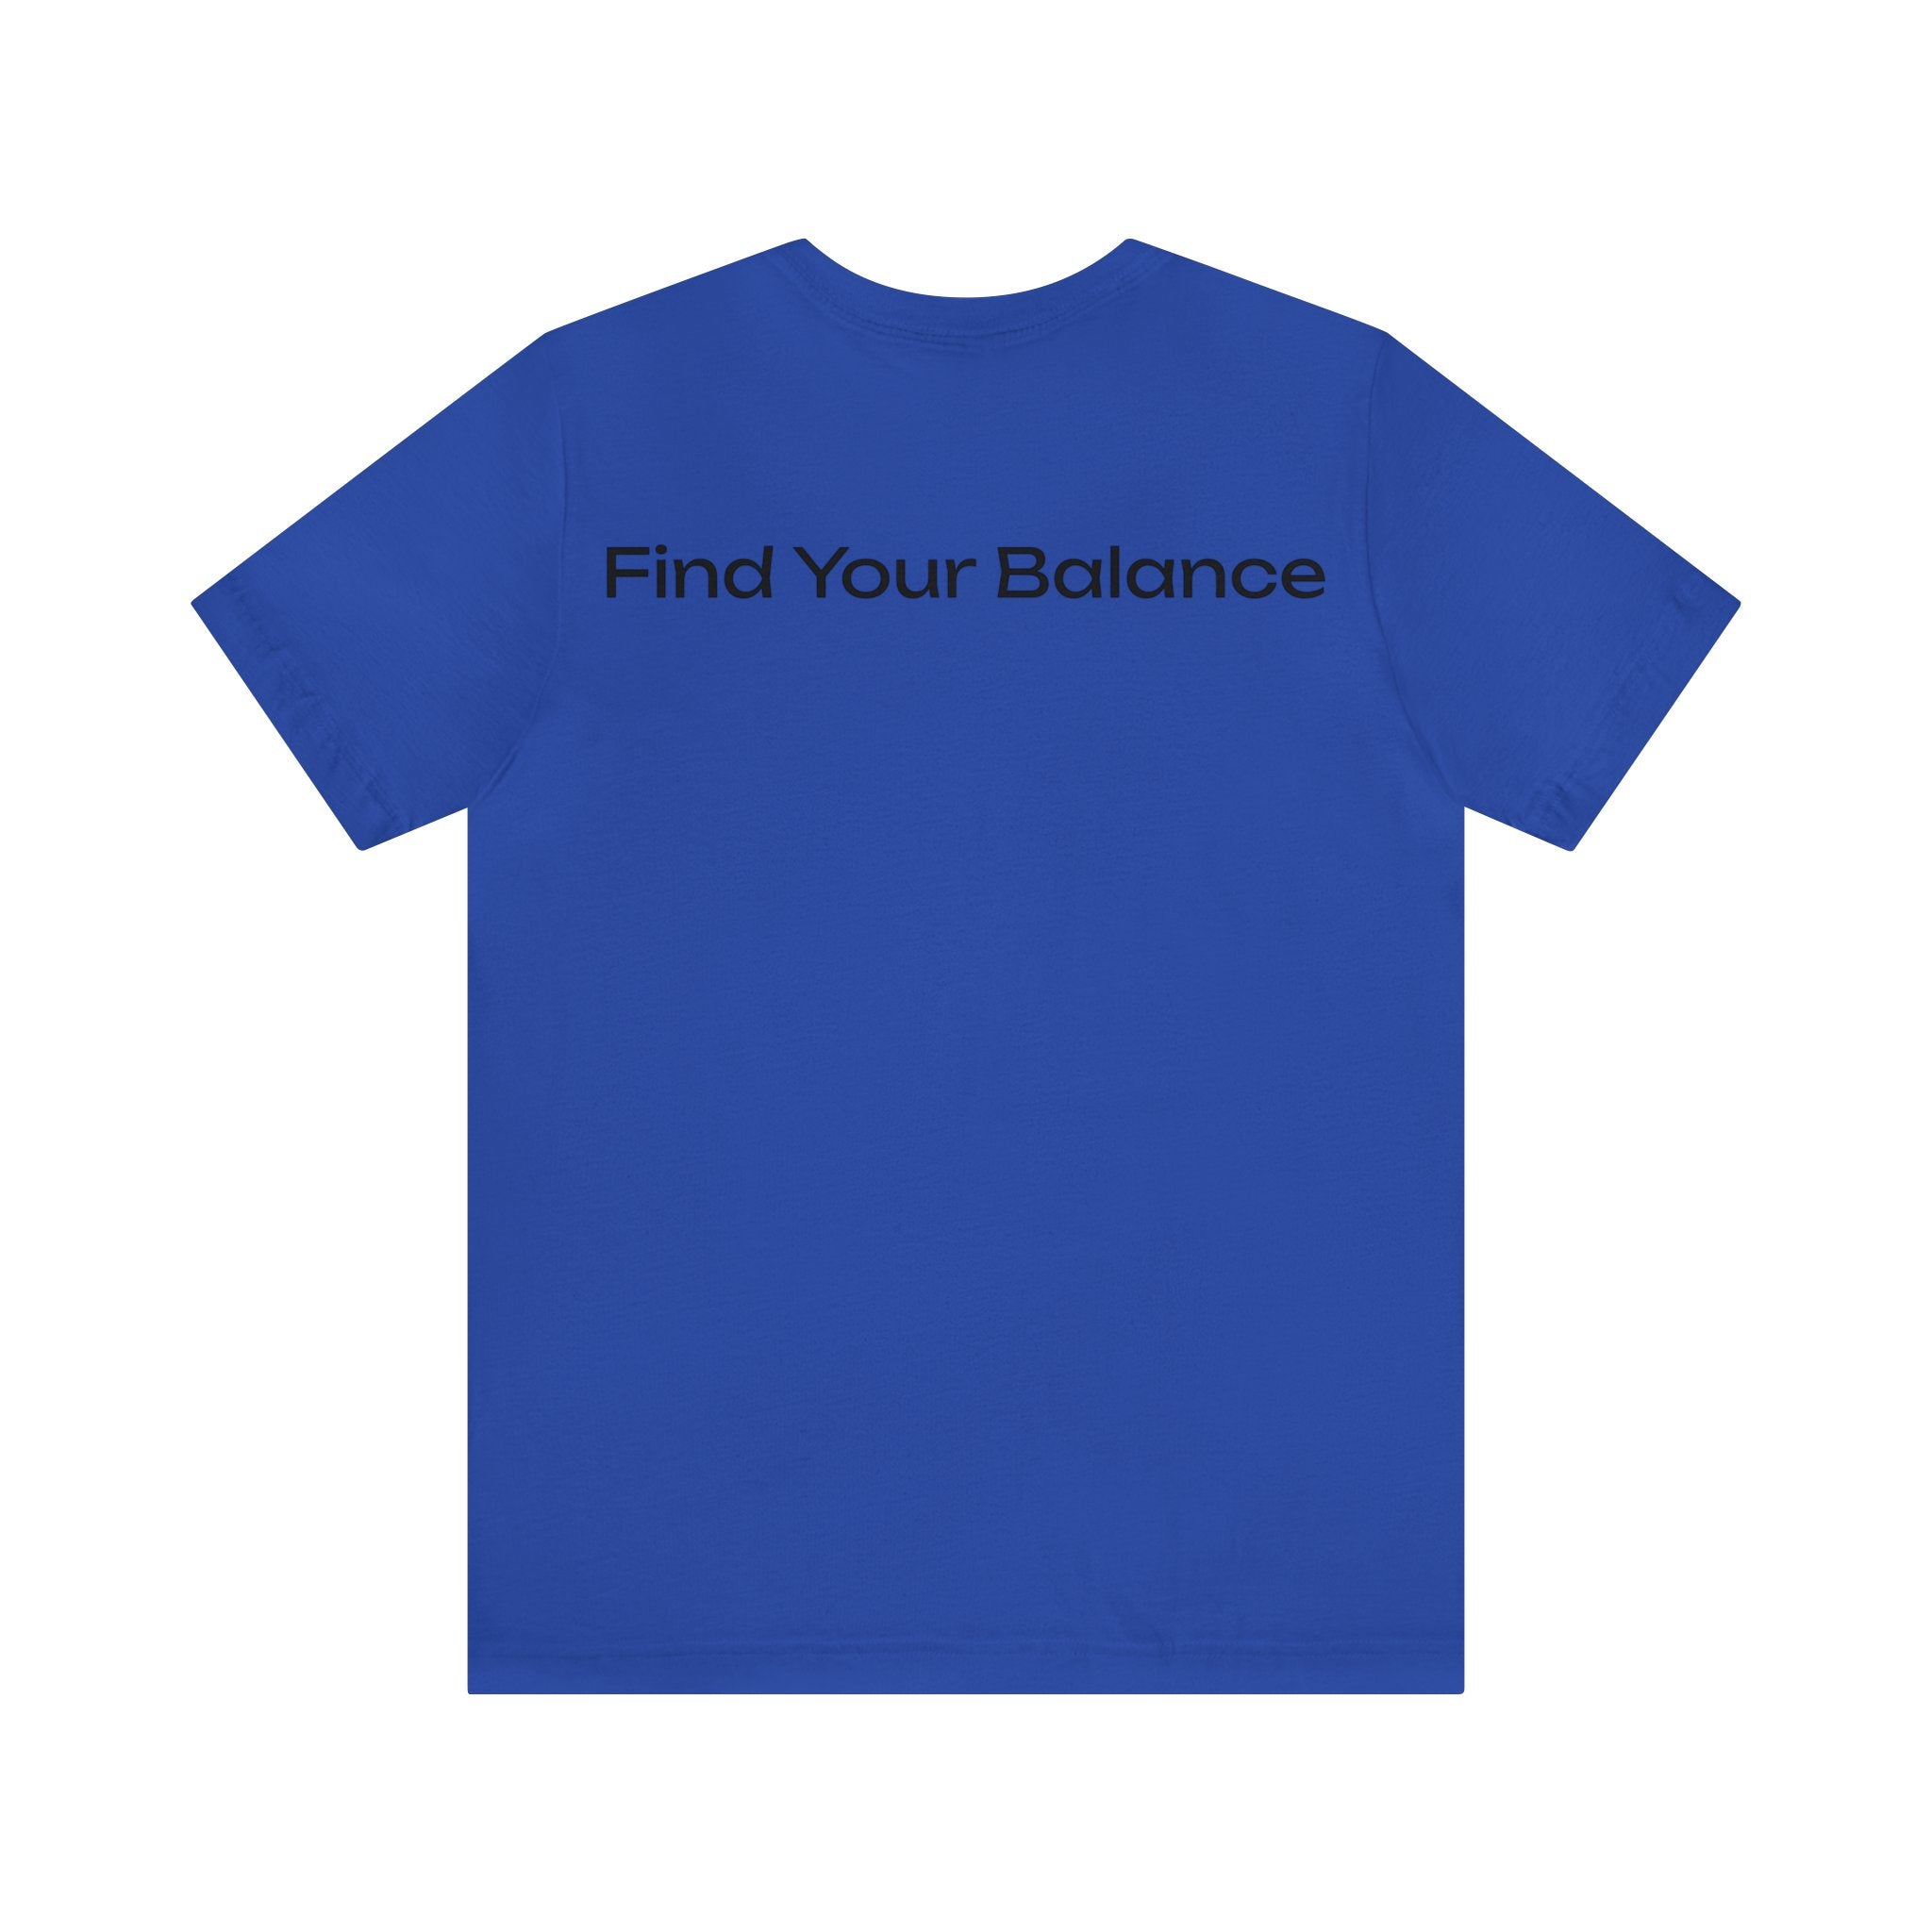 Find Your Balance Jersey Tee - Bella+Canvas 3001 Heather Mauve Airlume Cotton Bella+Canvas 3001 Crew Neckline Jersey Short Sleeve Lightweight Fabric Mental Health Support Retail Fit Tear-away Label Tee Unisex Tee T-Shirt 5585487586496682264_2048 Printify